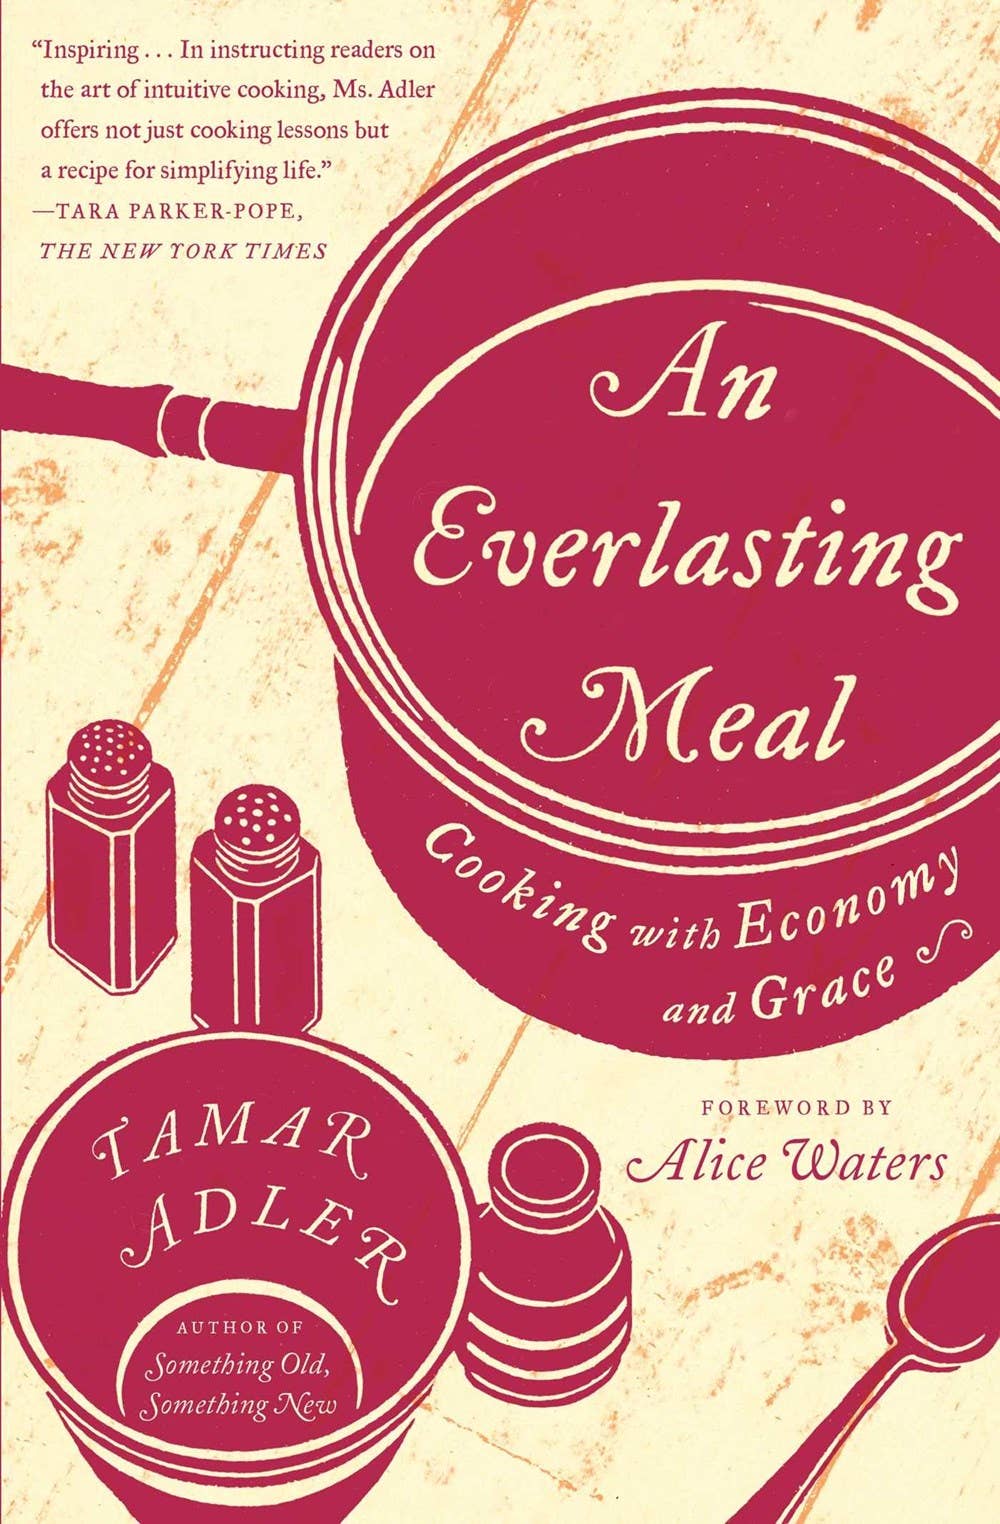 Everlasting Meal: Cooking with Economy and Grace